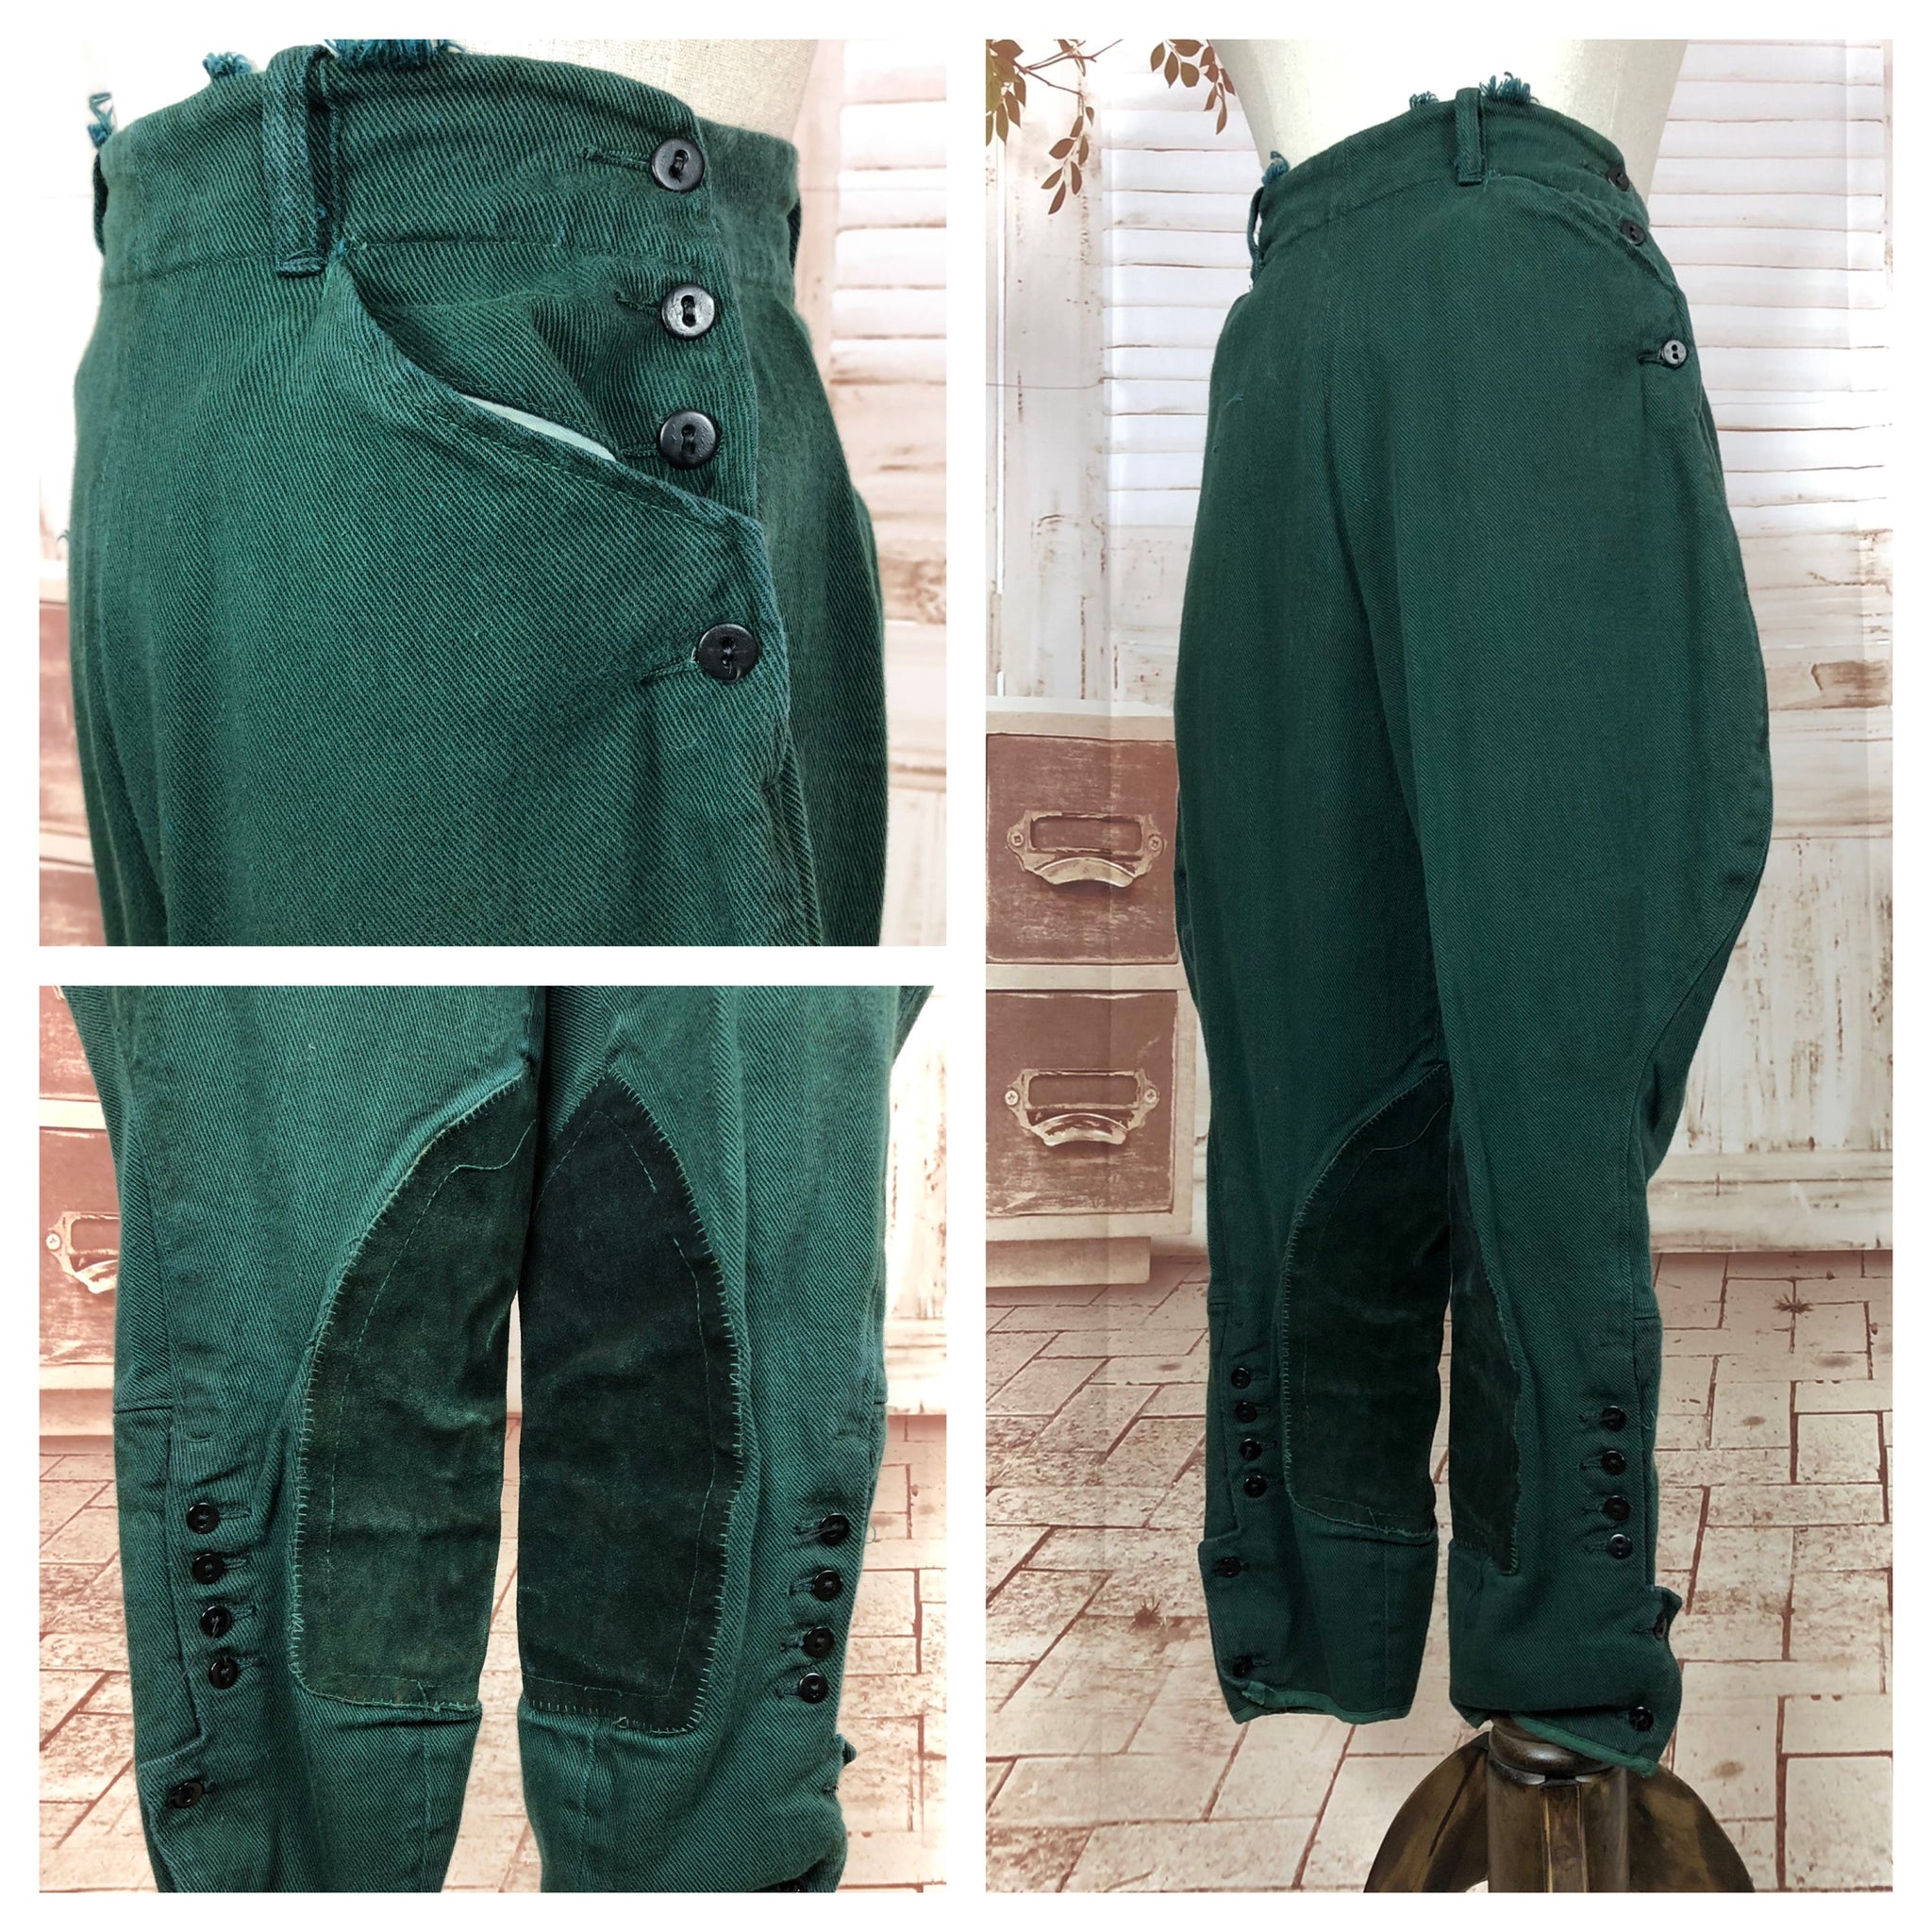 LAYAWAY PAYMENT 1 OF 3 - RESERVED FOR MAIKEN - Fabulous Original 1940s 40s Vintage Forest Green Riding Jodhpurs By Kerrybrooke